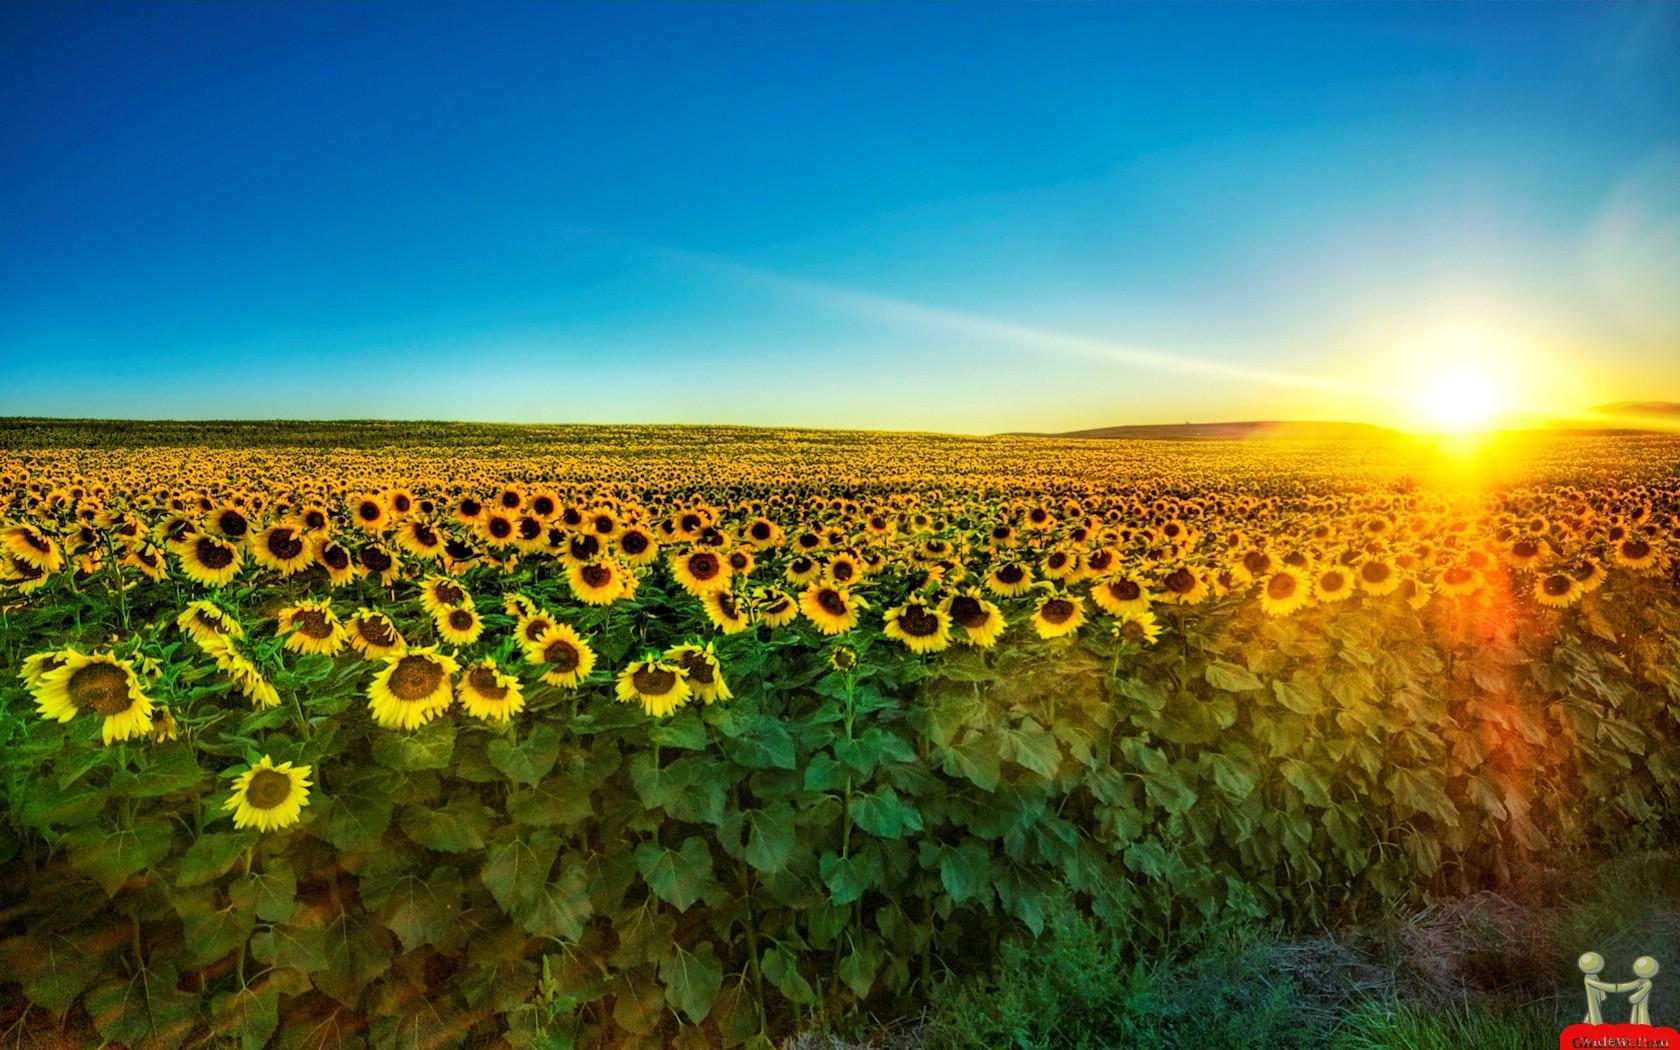 Rising Sun And Sunflowers Wallpapers - Wallpaper Cave